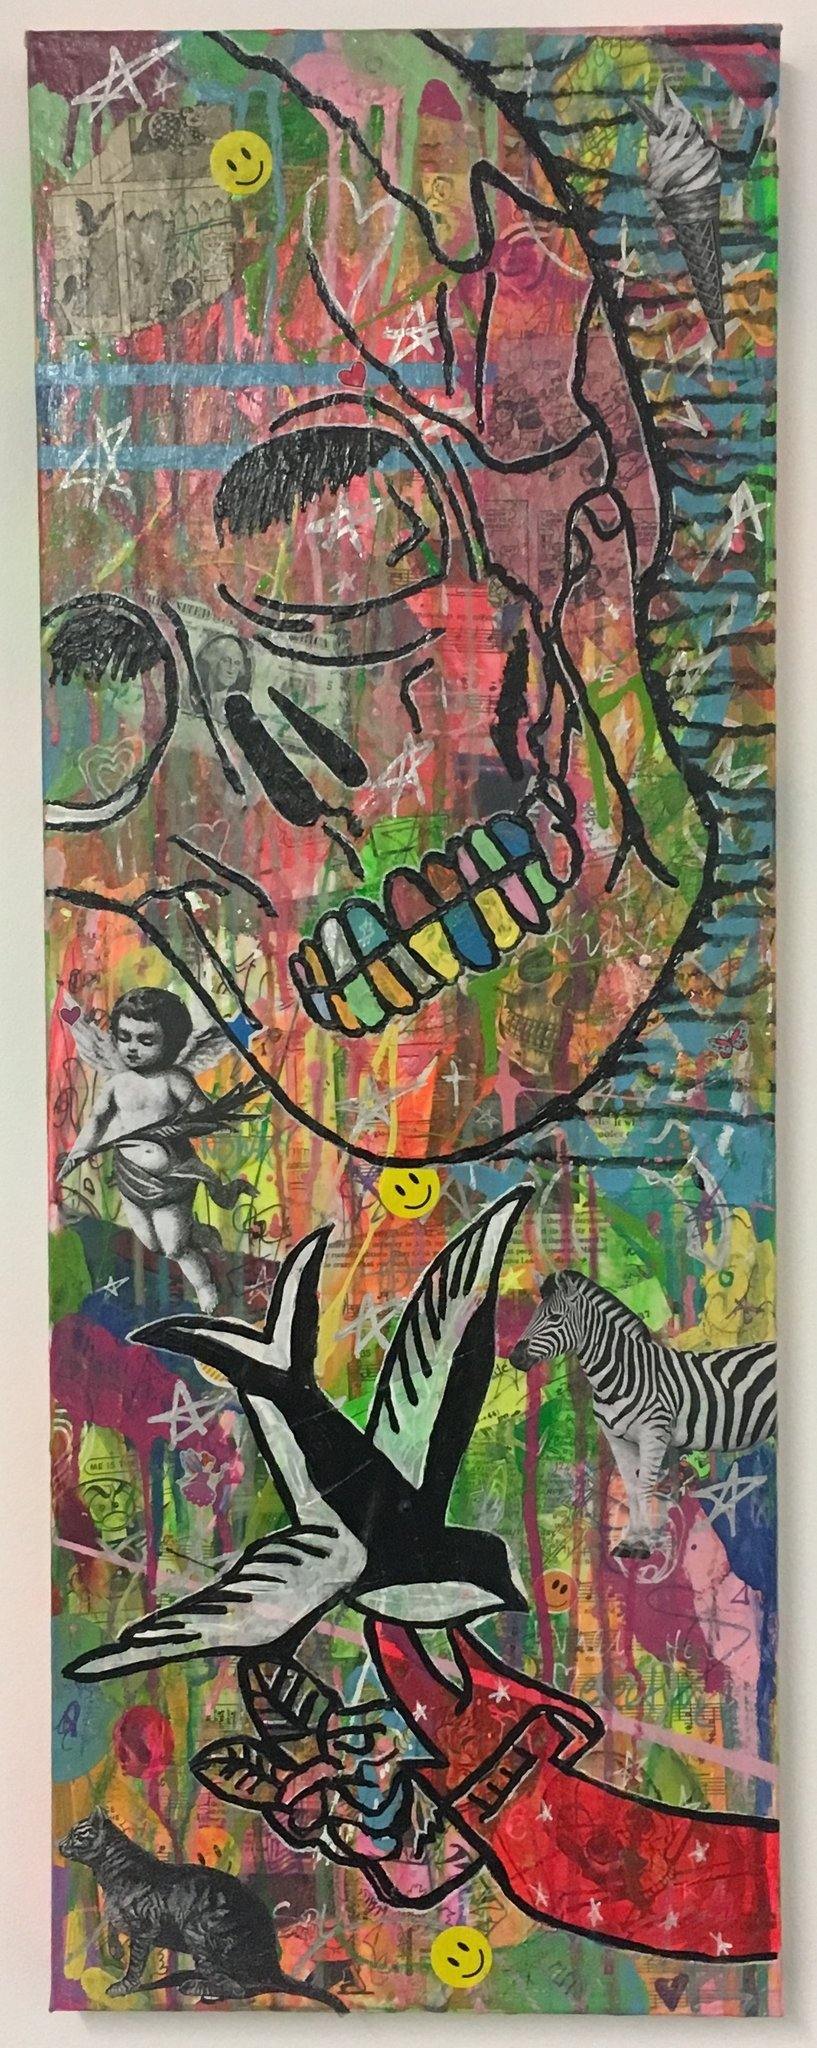 Taking care of business by Barrie J Davies 2018, Mixed media on canvas, 30cm x 80cm, unframed. Barrie J Davies is an Artist - Pop Art and Street art inspired Artist based in Brighton England UK - Pop Art Paintings, Street Art Prints & Editions available.